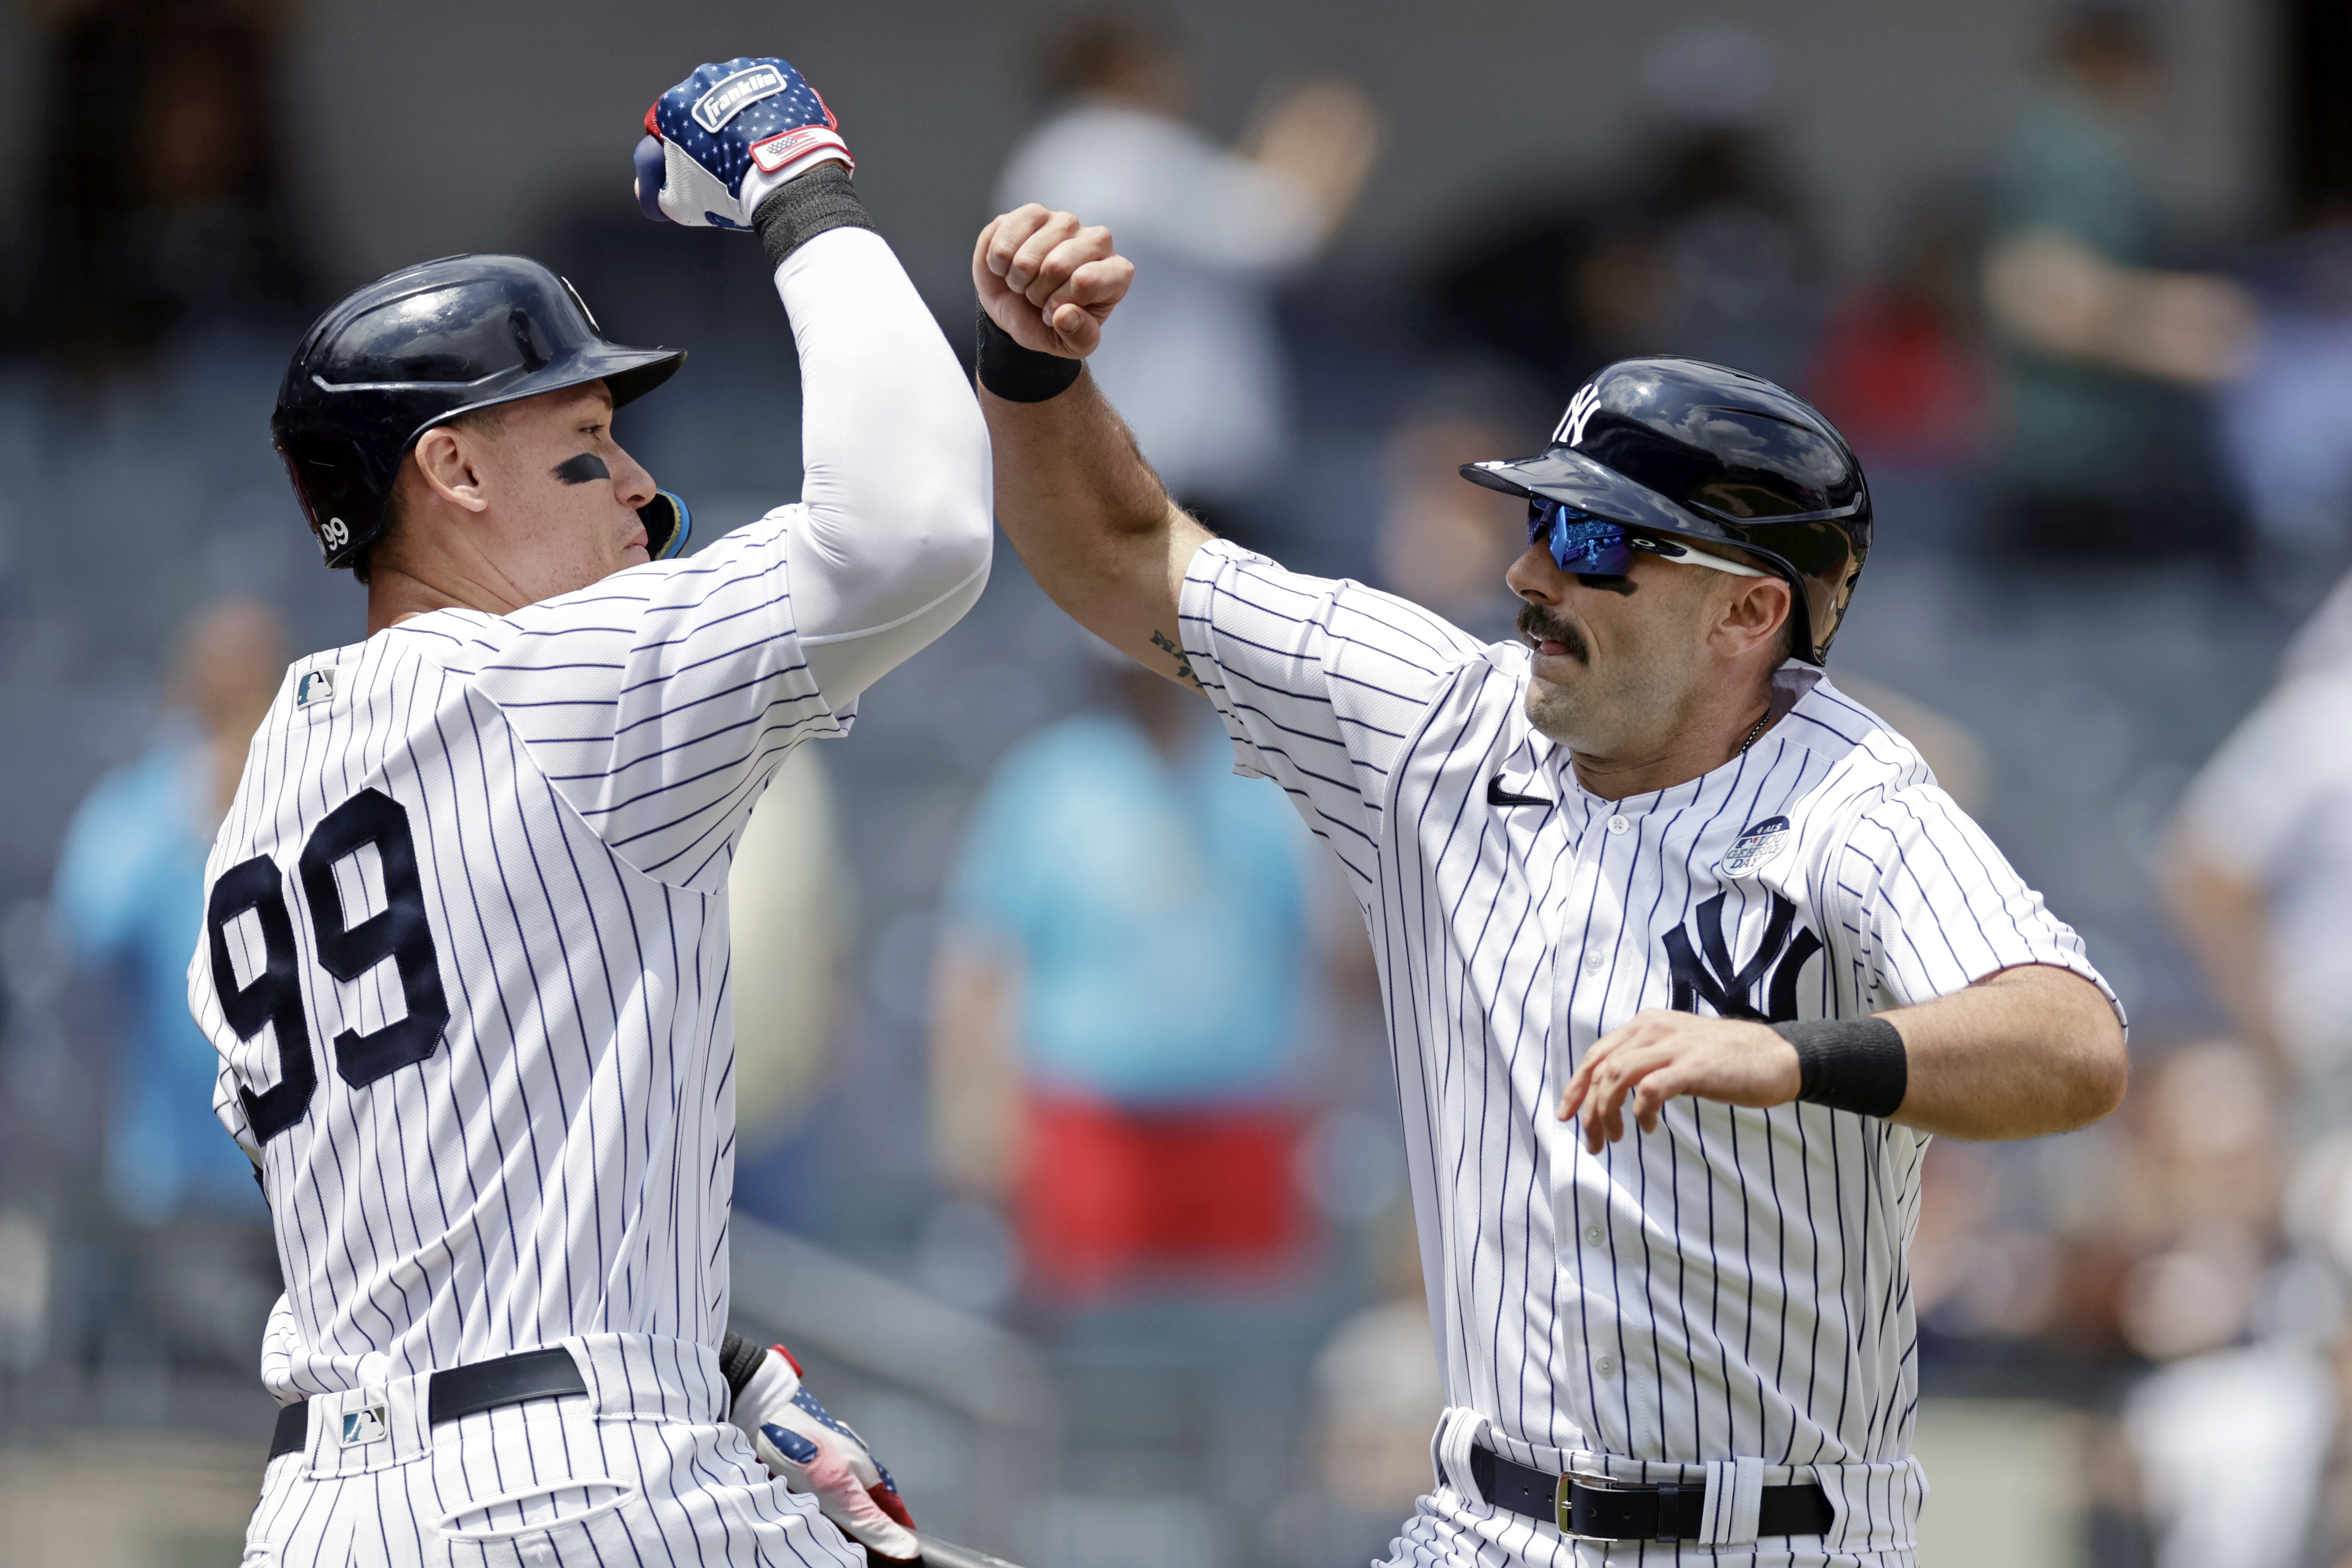 Why isnt Fridays Yankees vs Tigers game on TV? Heres how to watch free on Apple TV+